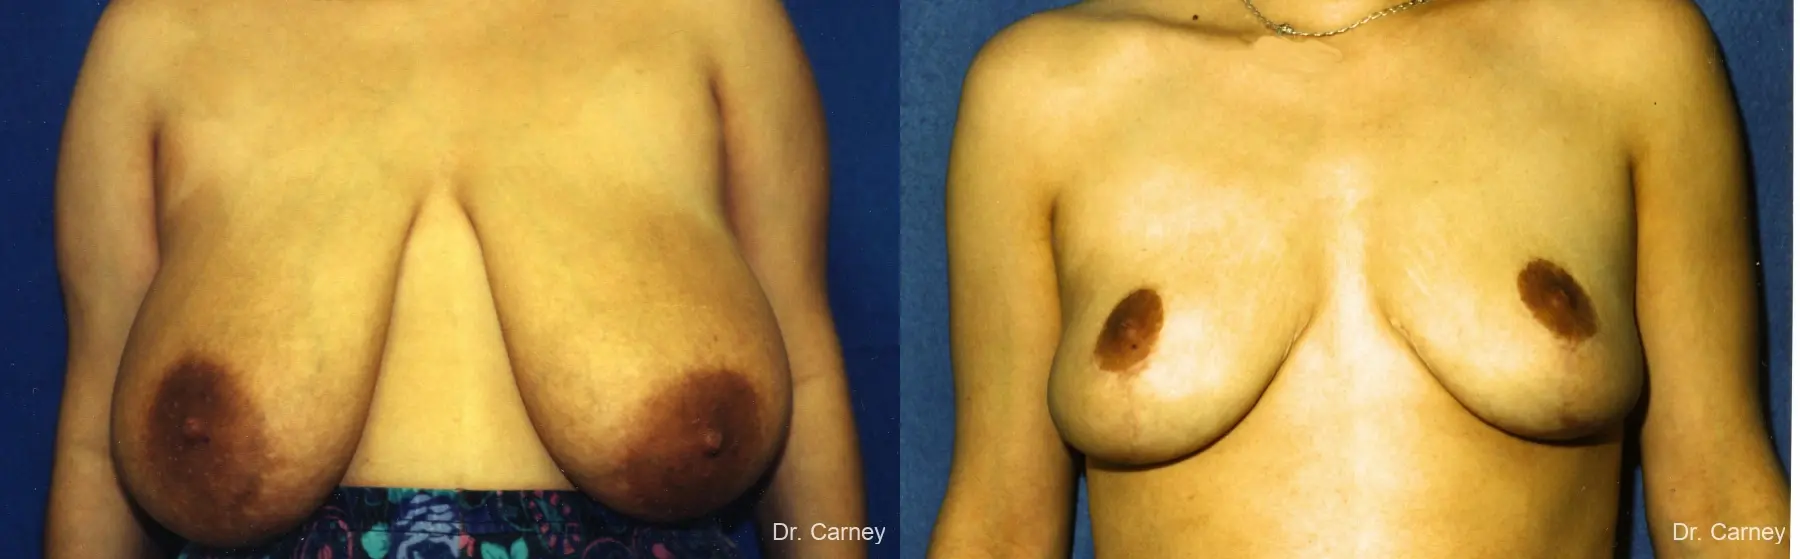 Virginia Beach Breast Lift 1191 - Before and After